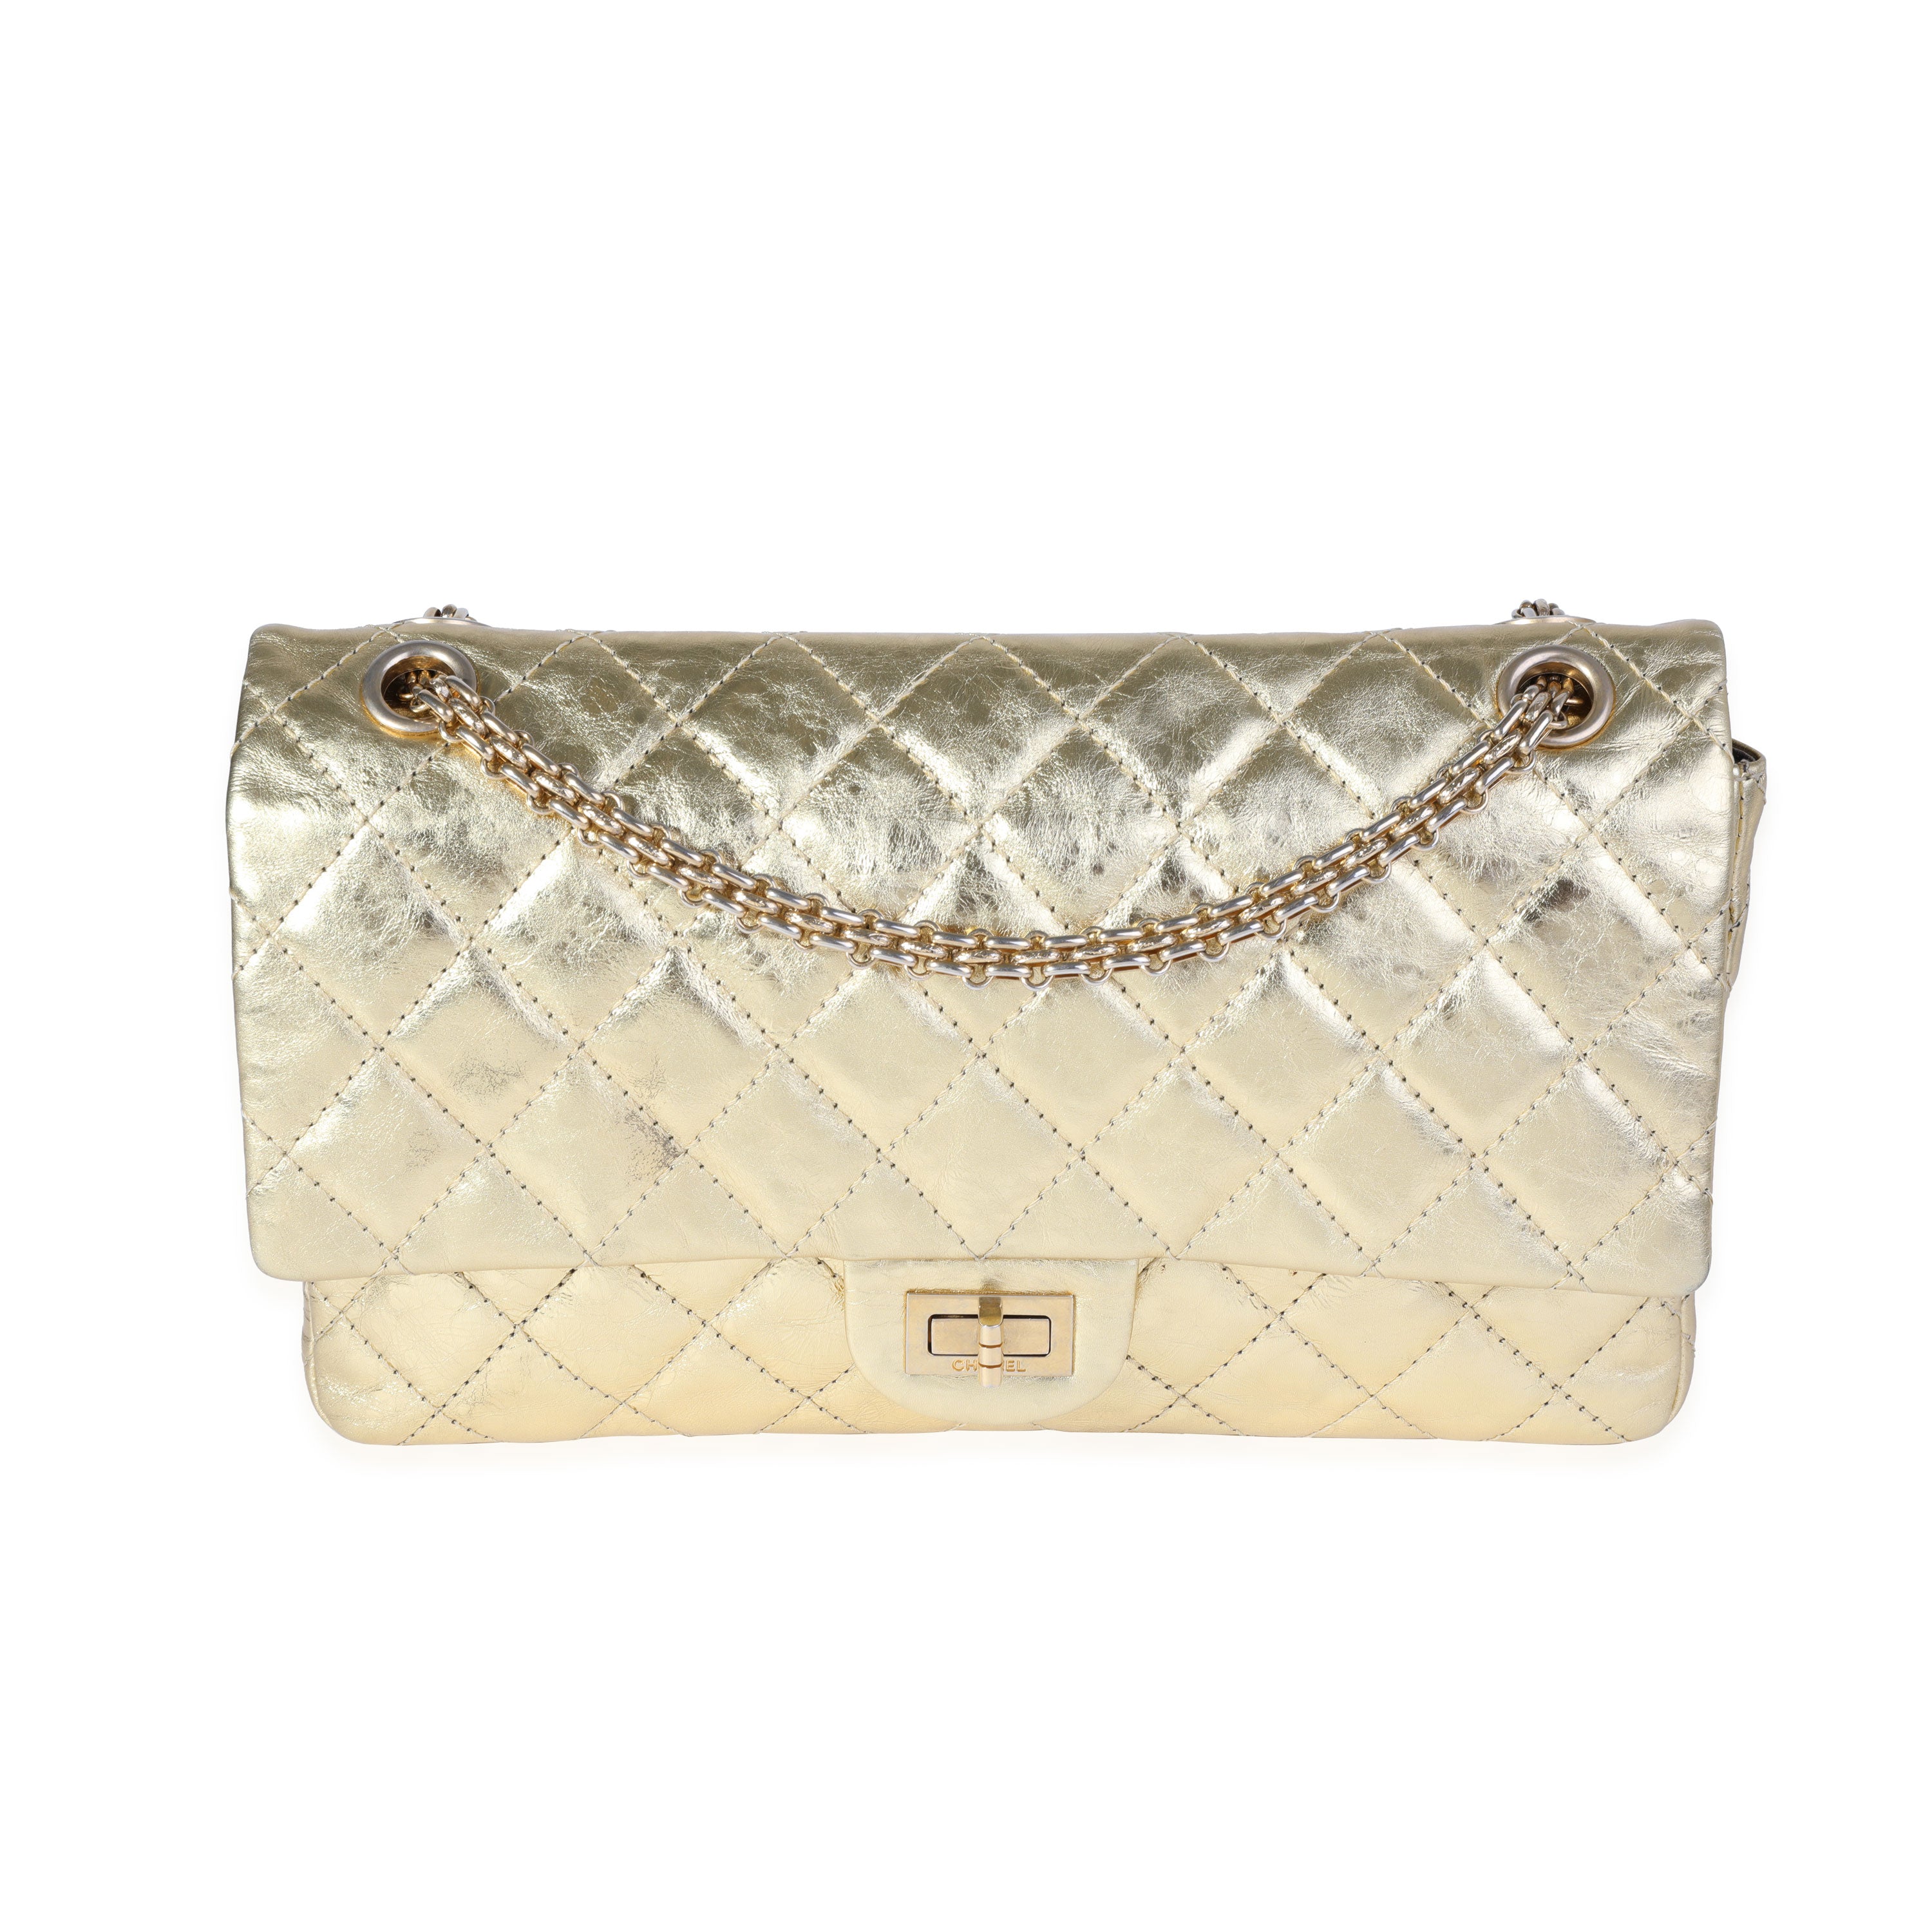 Chanel Metallic Gold Leather Reissue Flap Bag